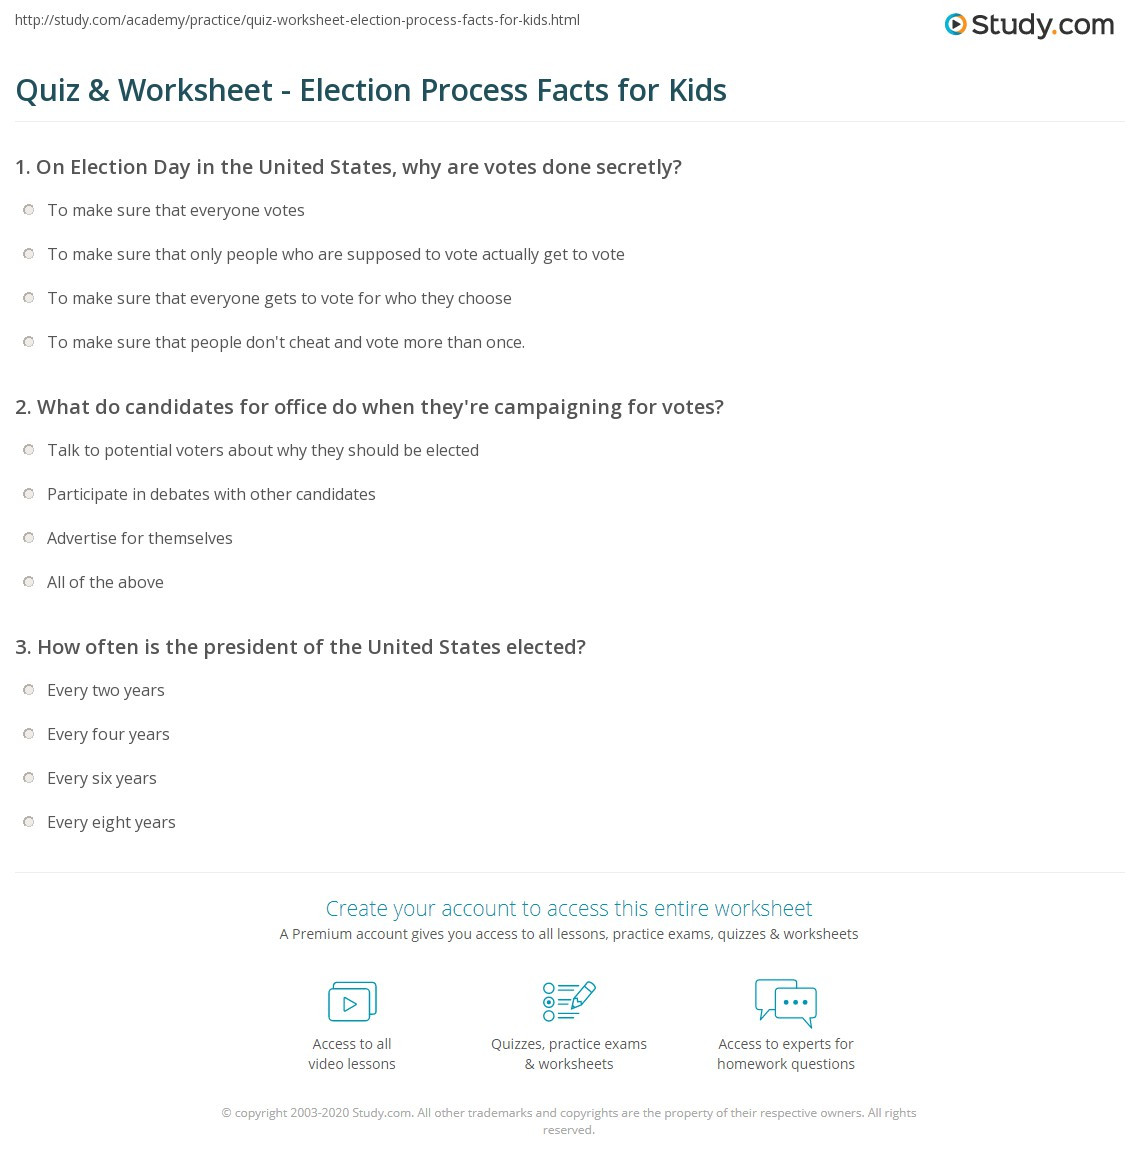 The Electoral Process Worksheet Quiz &amp; Worksheet Election Process Facts for Kids